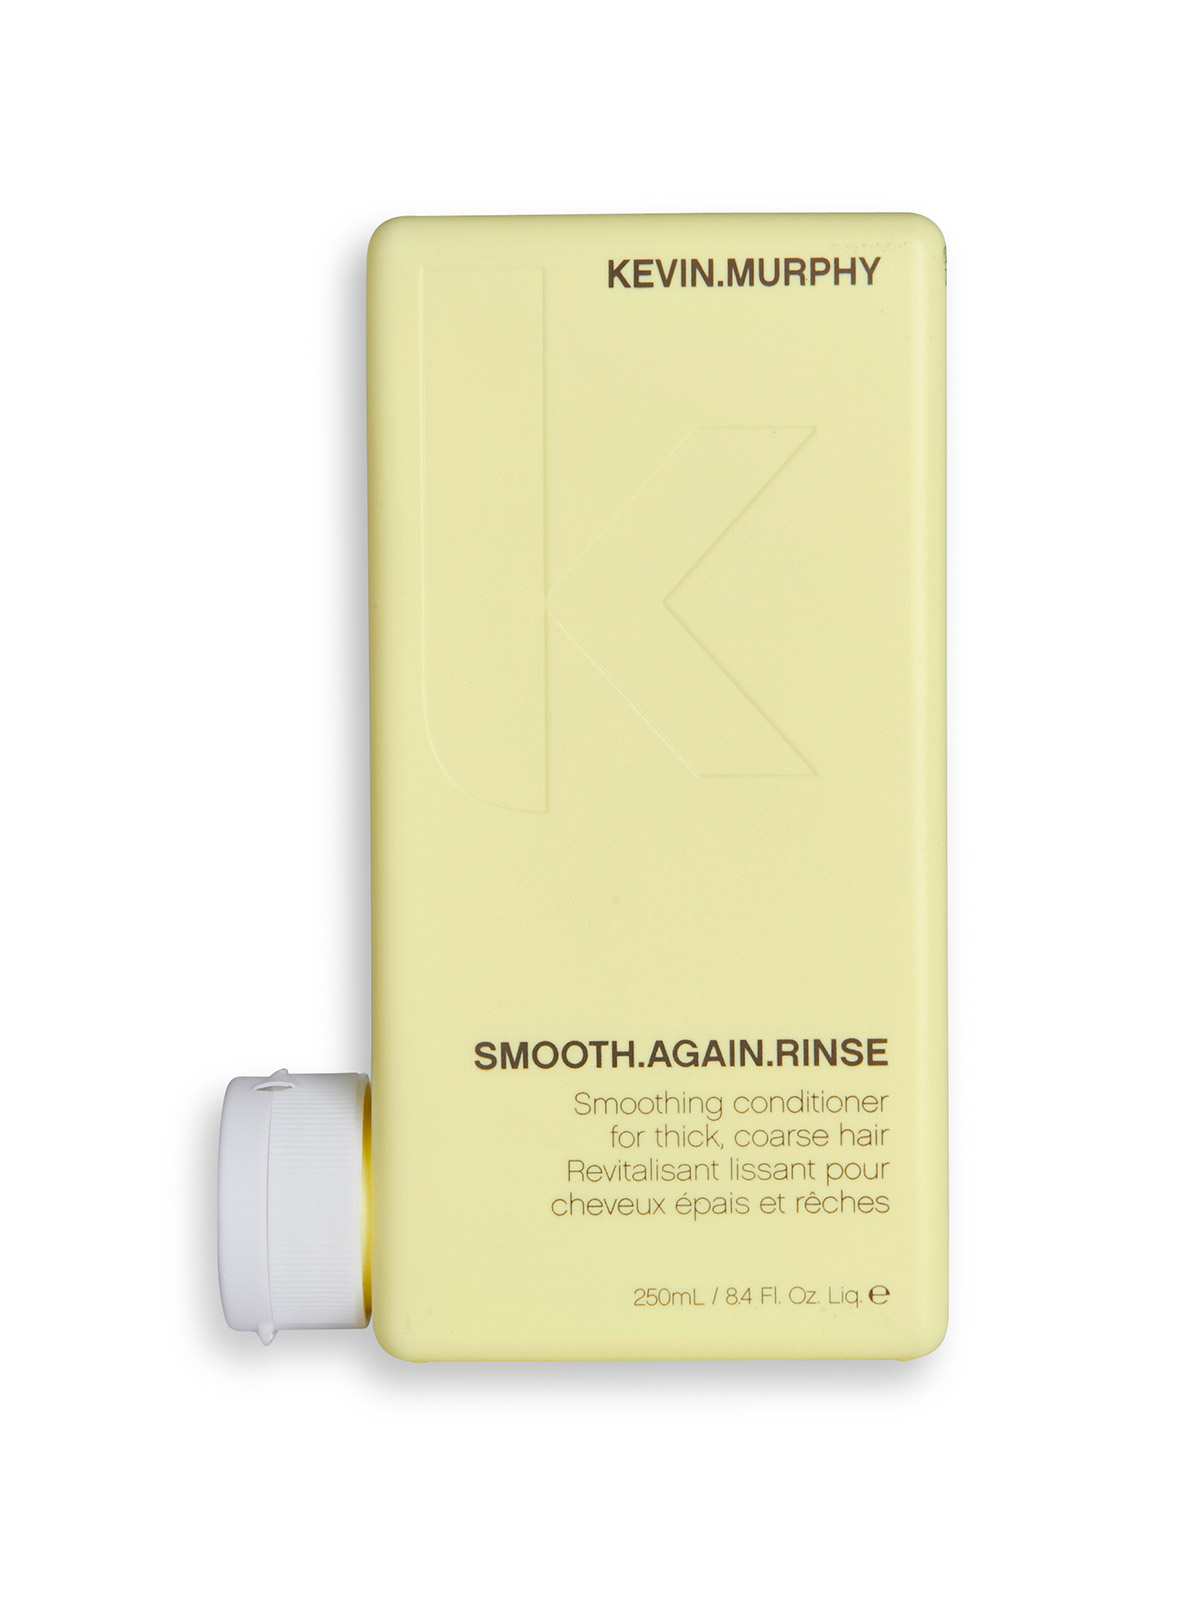 KEVIN.MURPHY SMOOTH.AGAIN RINSE